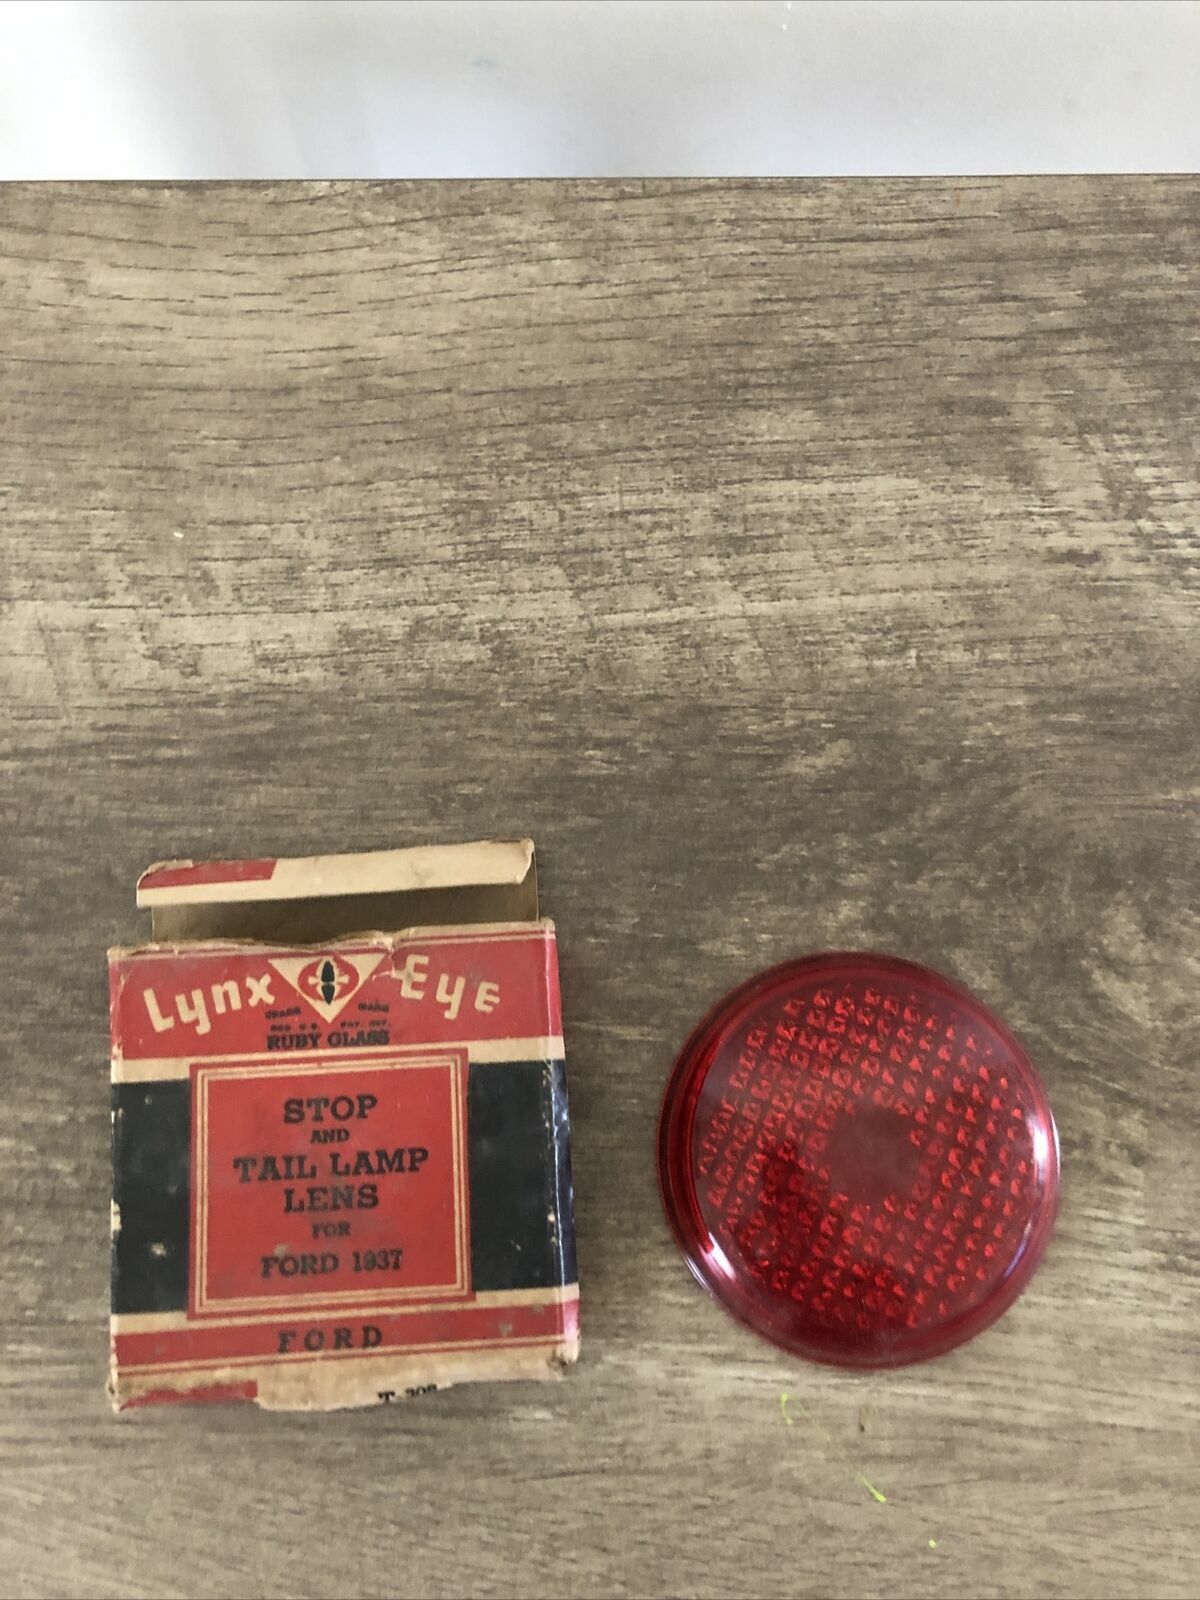 Lynx Eye Ruby Glass Stop & Tail Lamp Lens - 1937 FORD - T-305 NOS